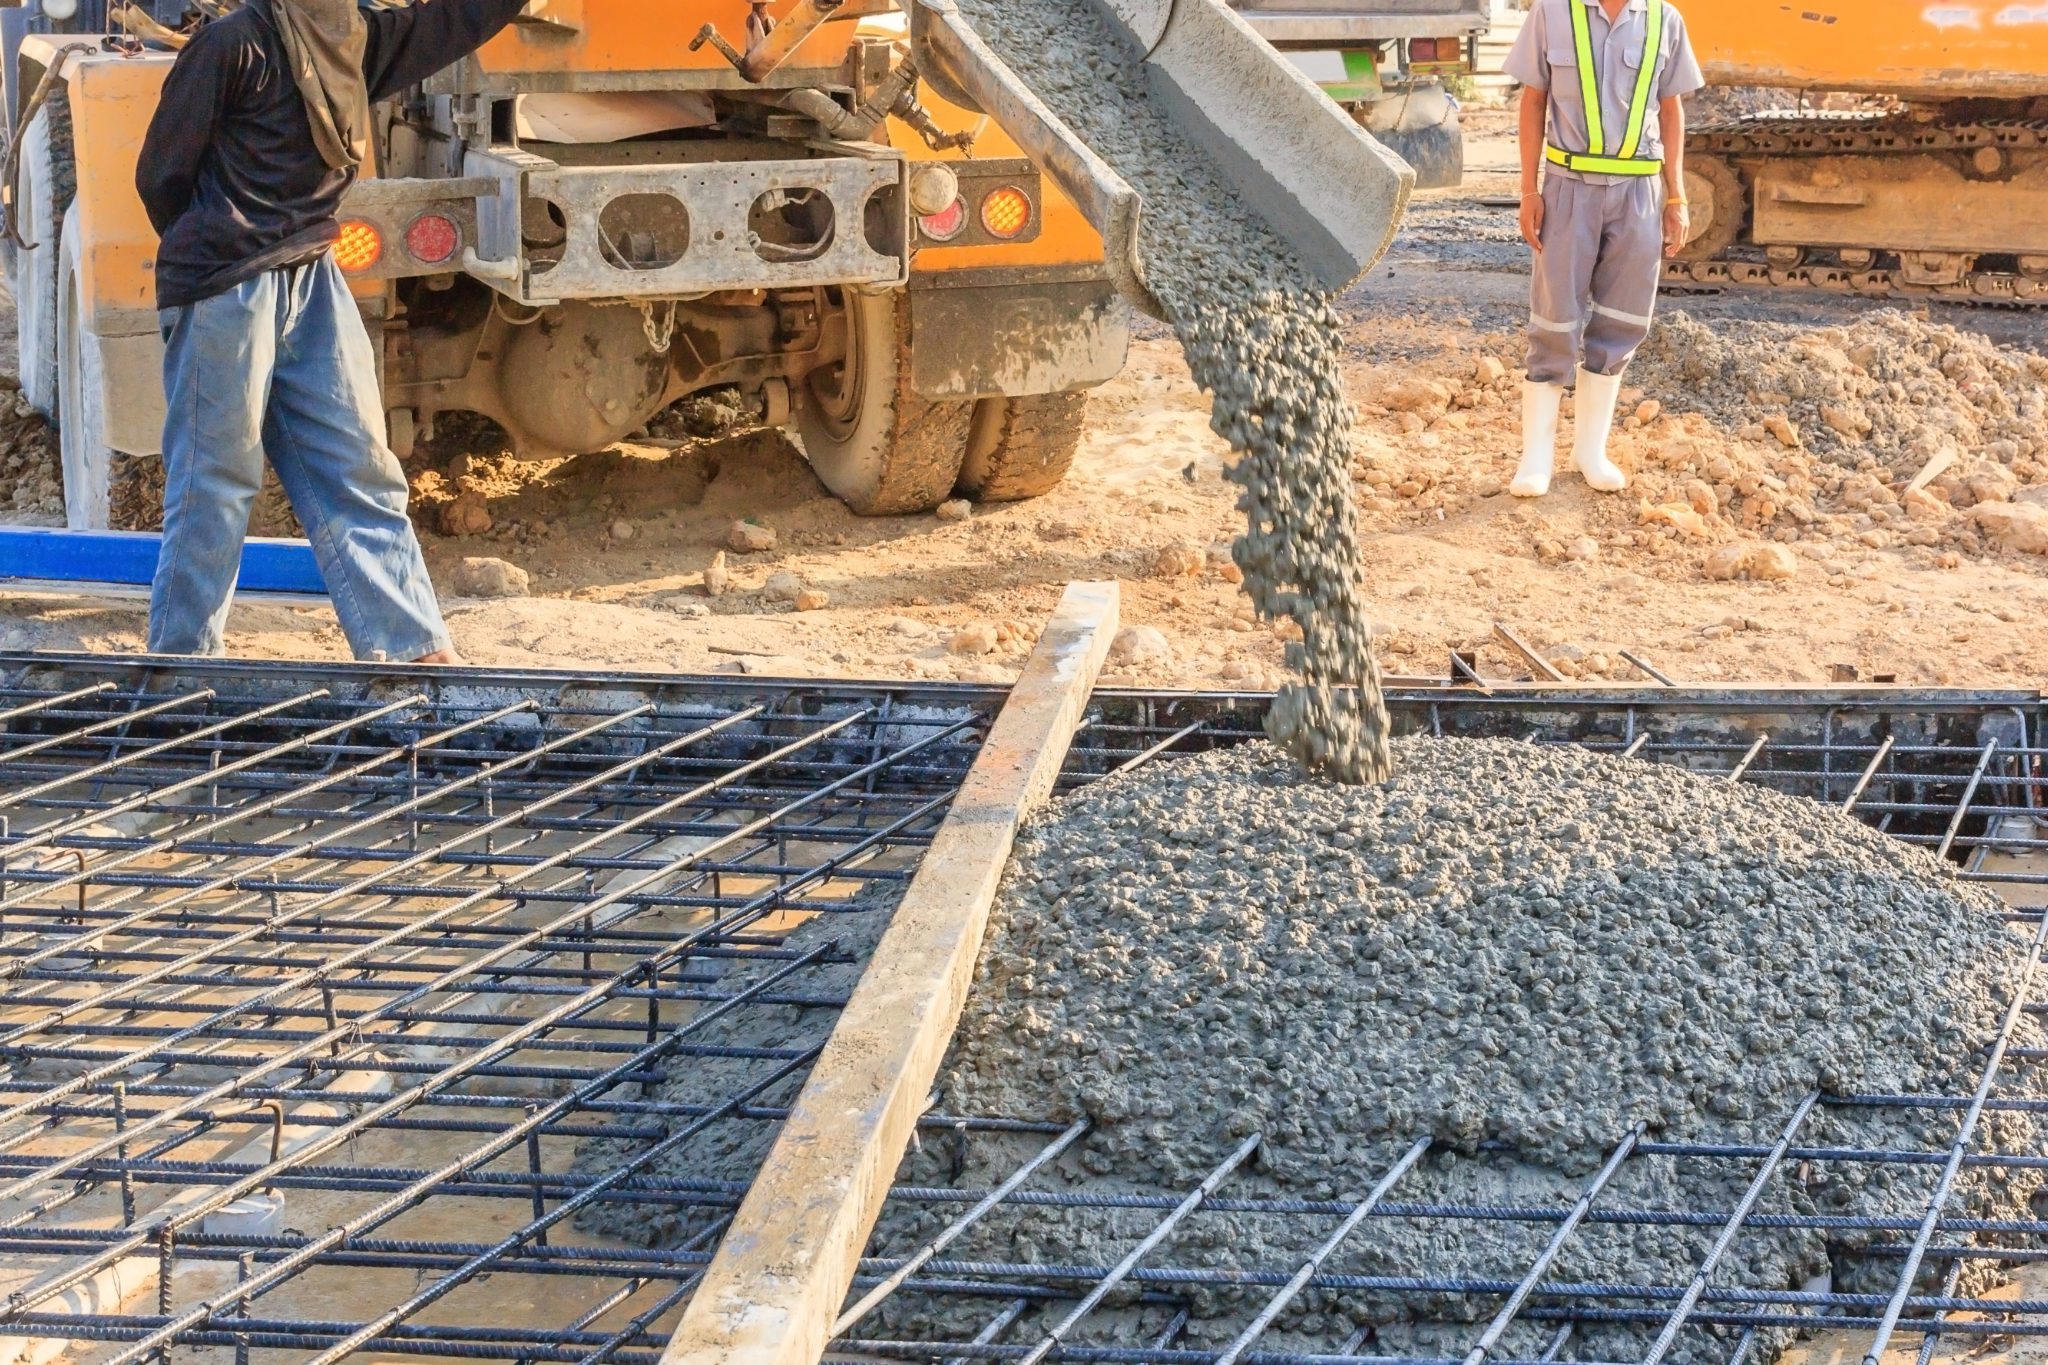 Concrete pouring during commercial concreting floors of buildings in construction site.